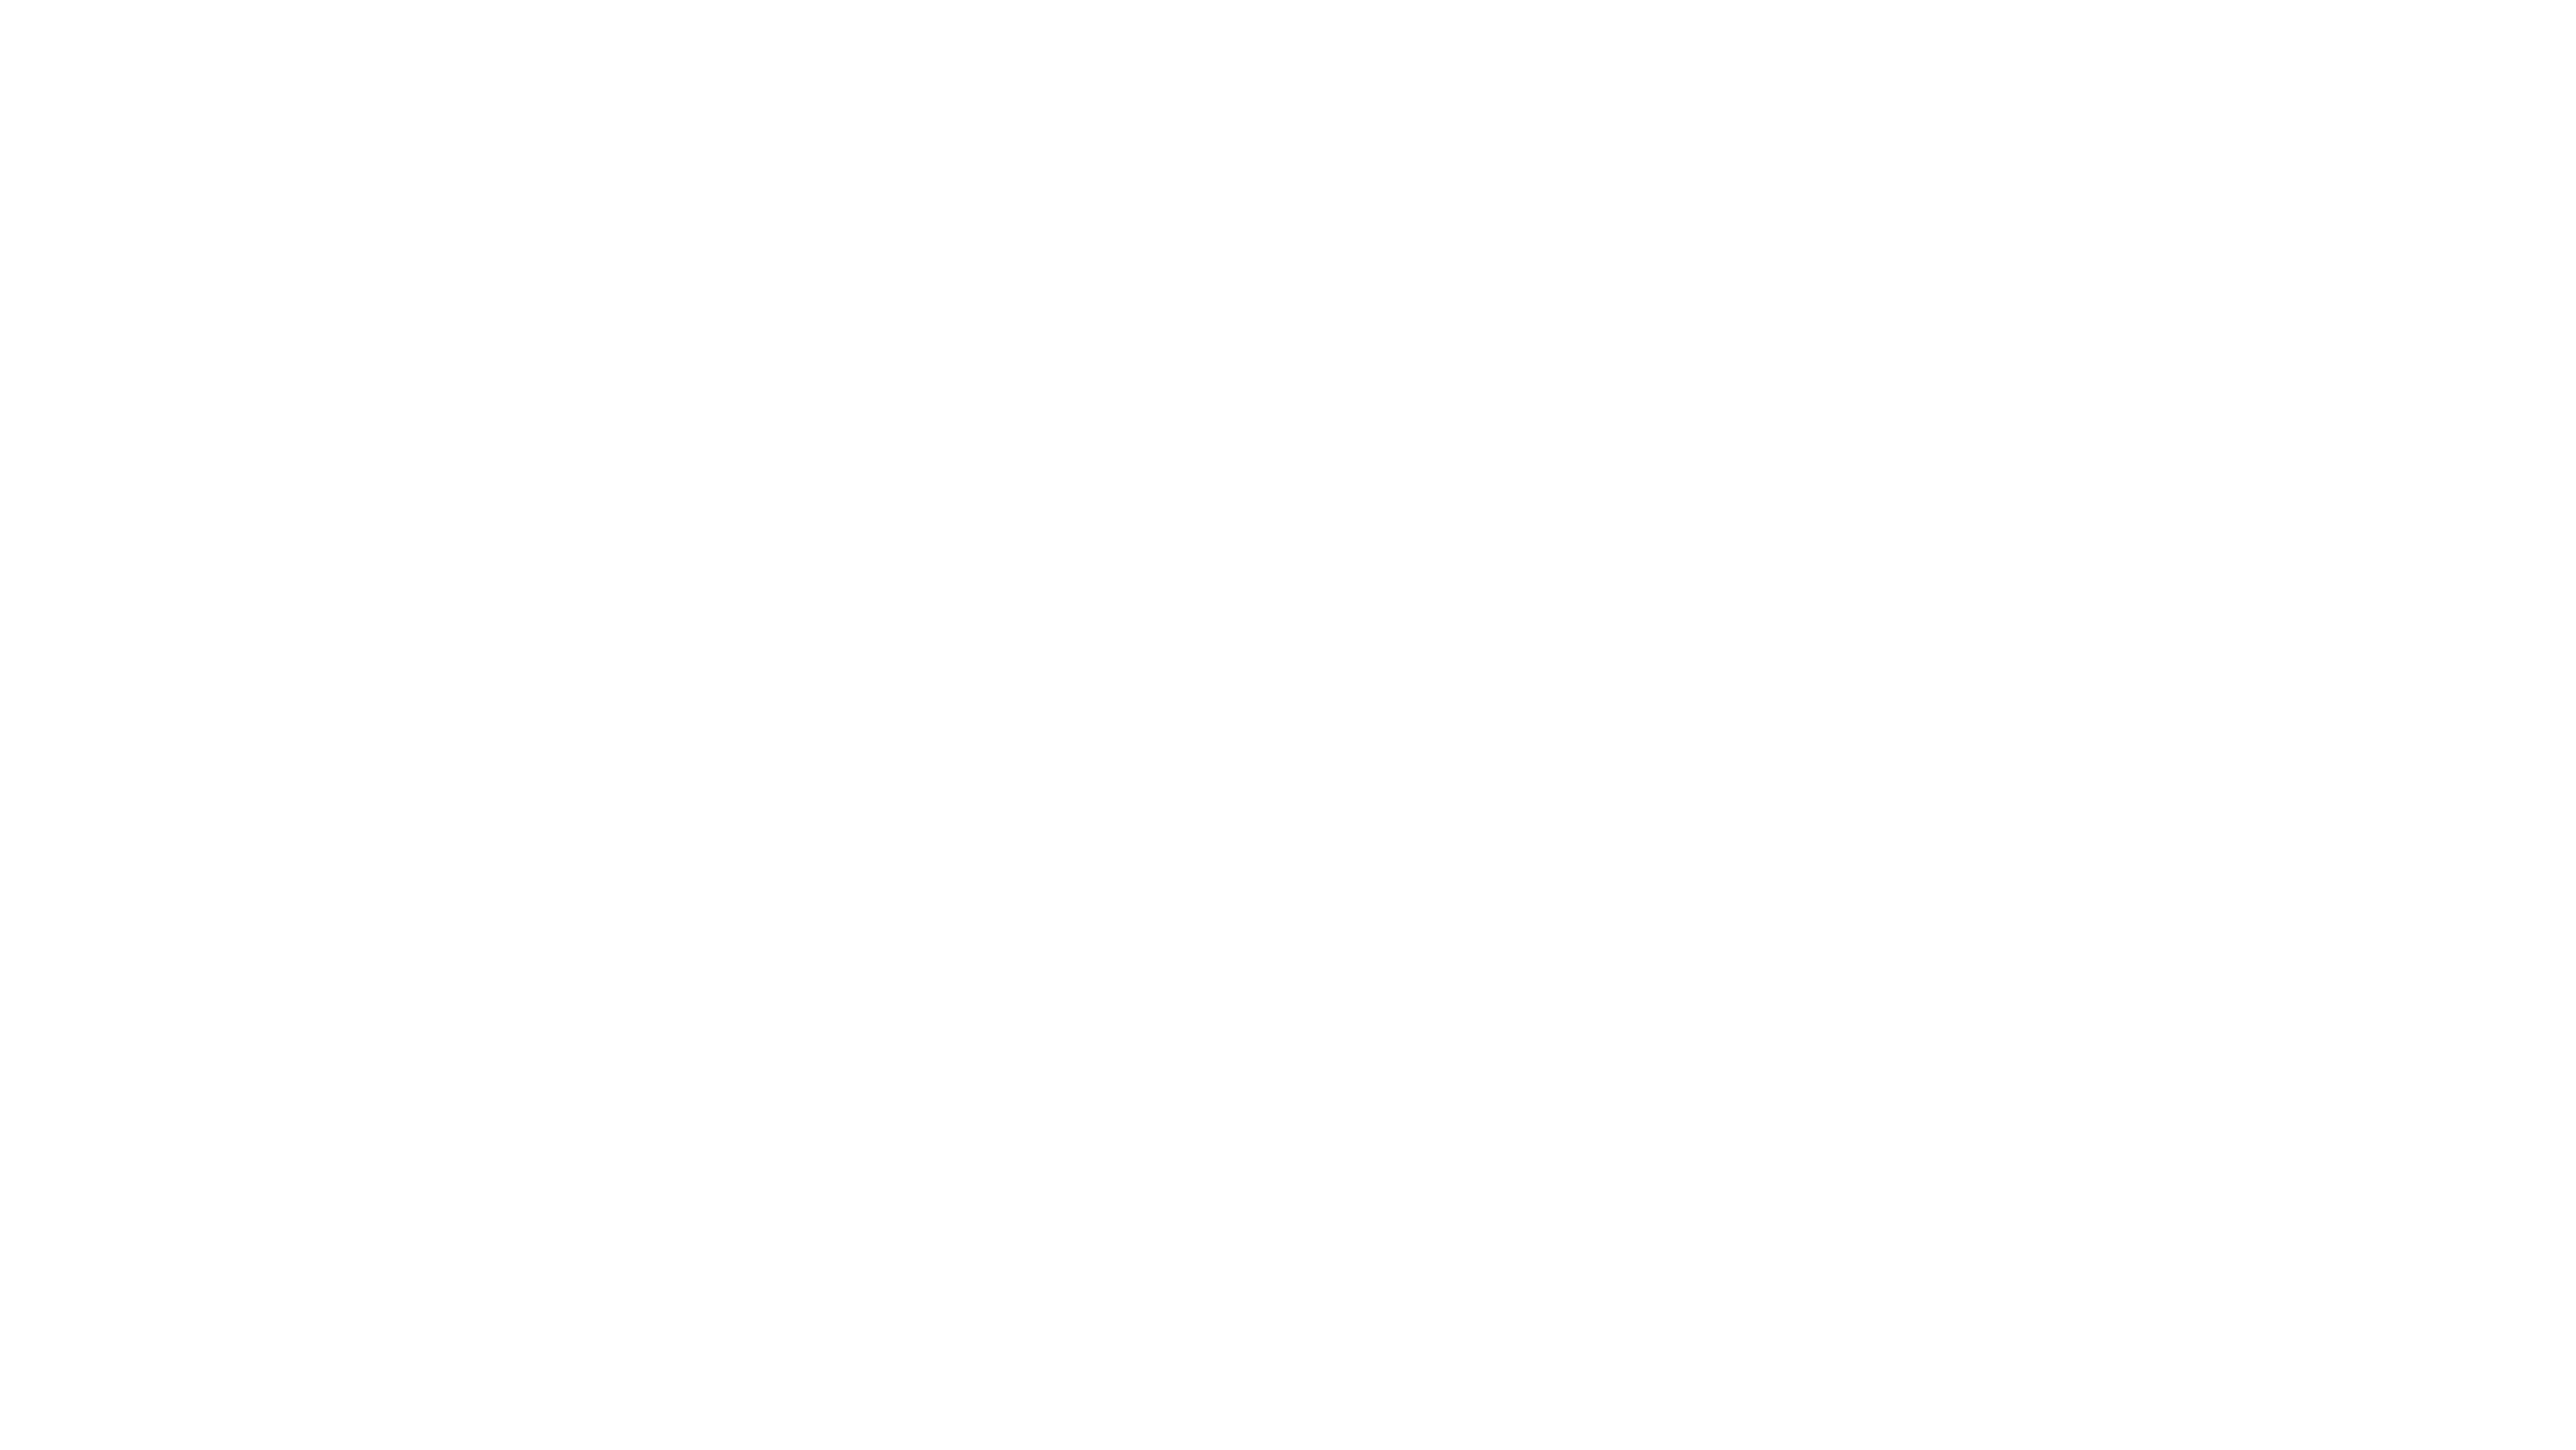 Built by Furches